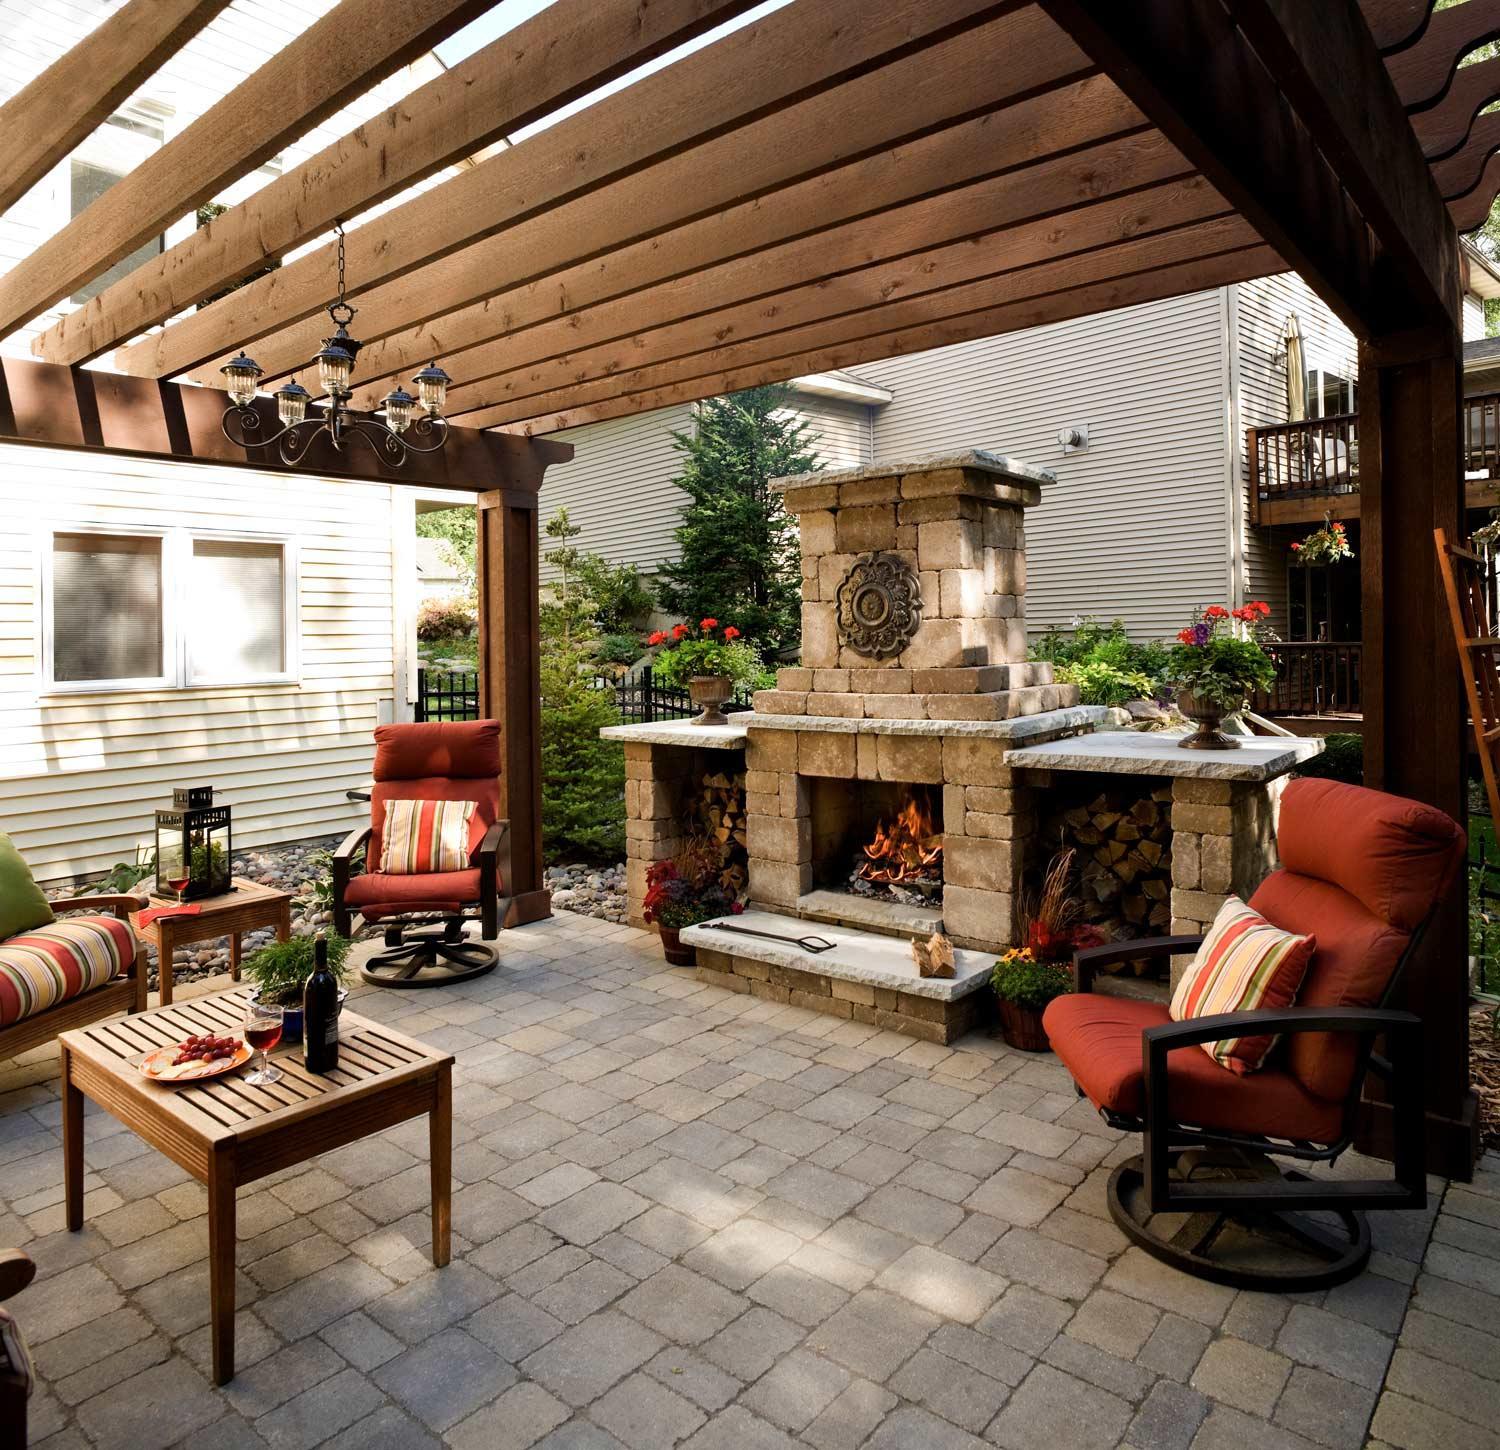 Pergola covers the entire patio in this outdoor living room backyard landscape in savage